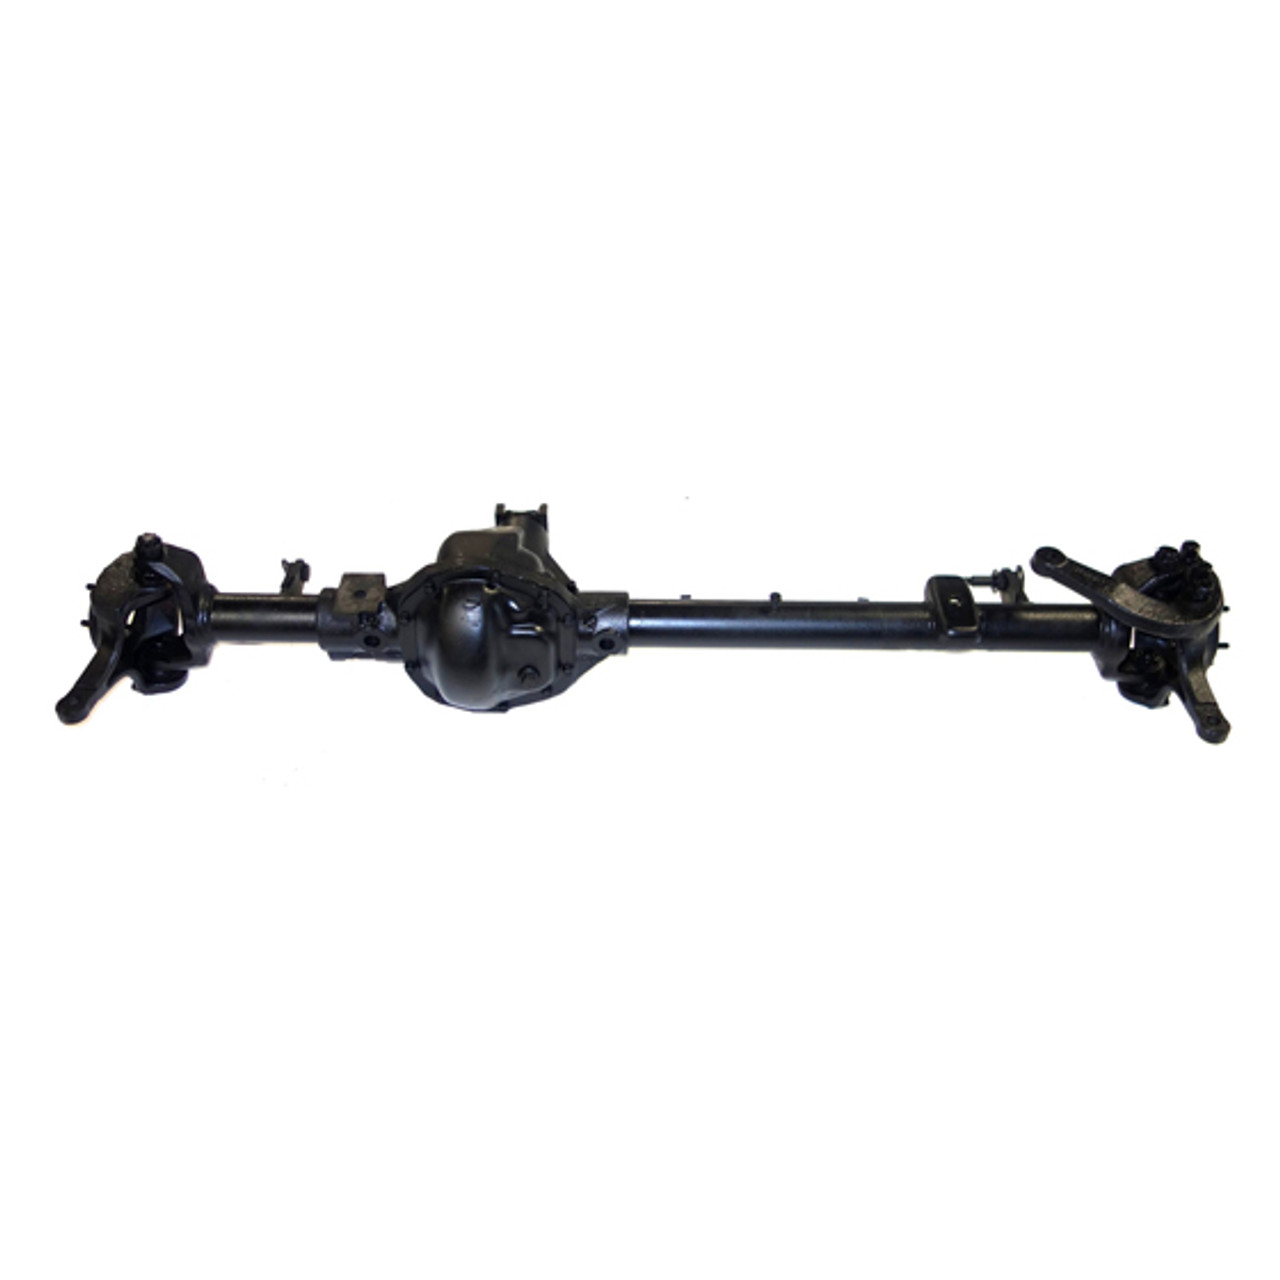 Reman Complete Axle Assembly for Dana 44 Front 1999 Dodge Ram 1500 3.54 Ratio with Rear Wheel ABS